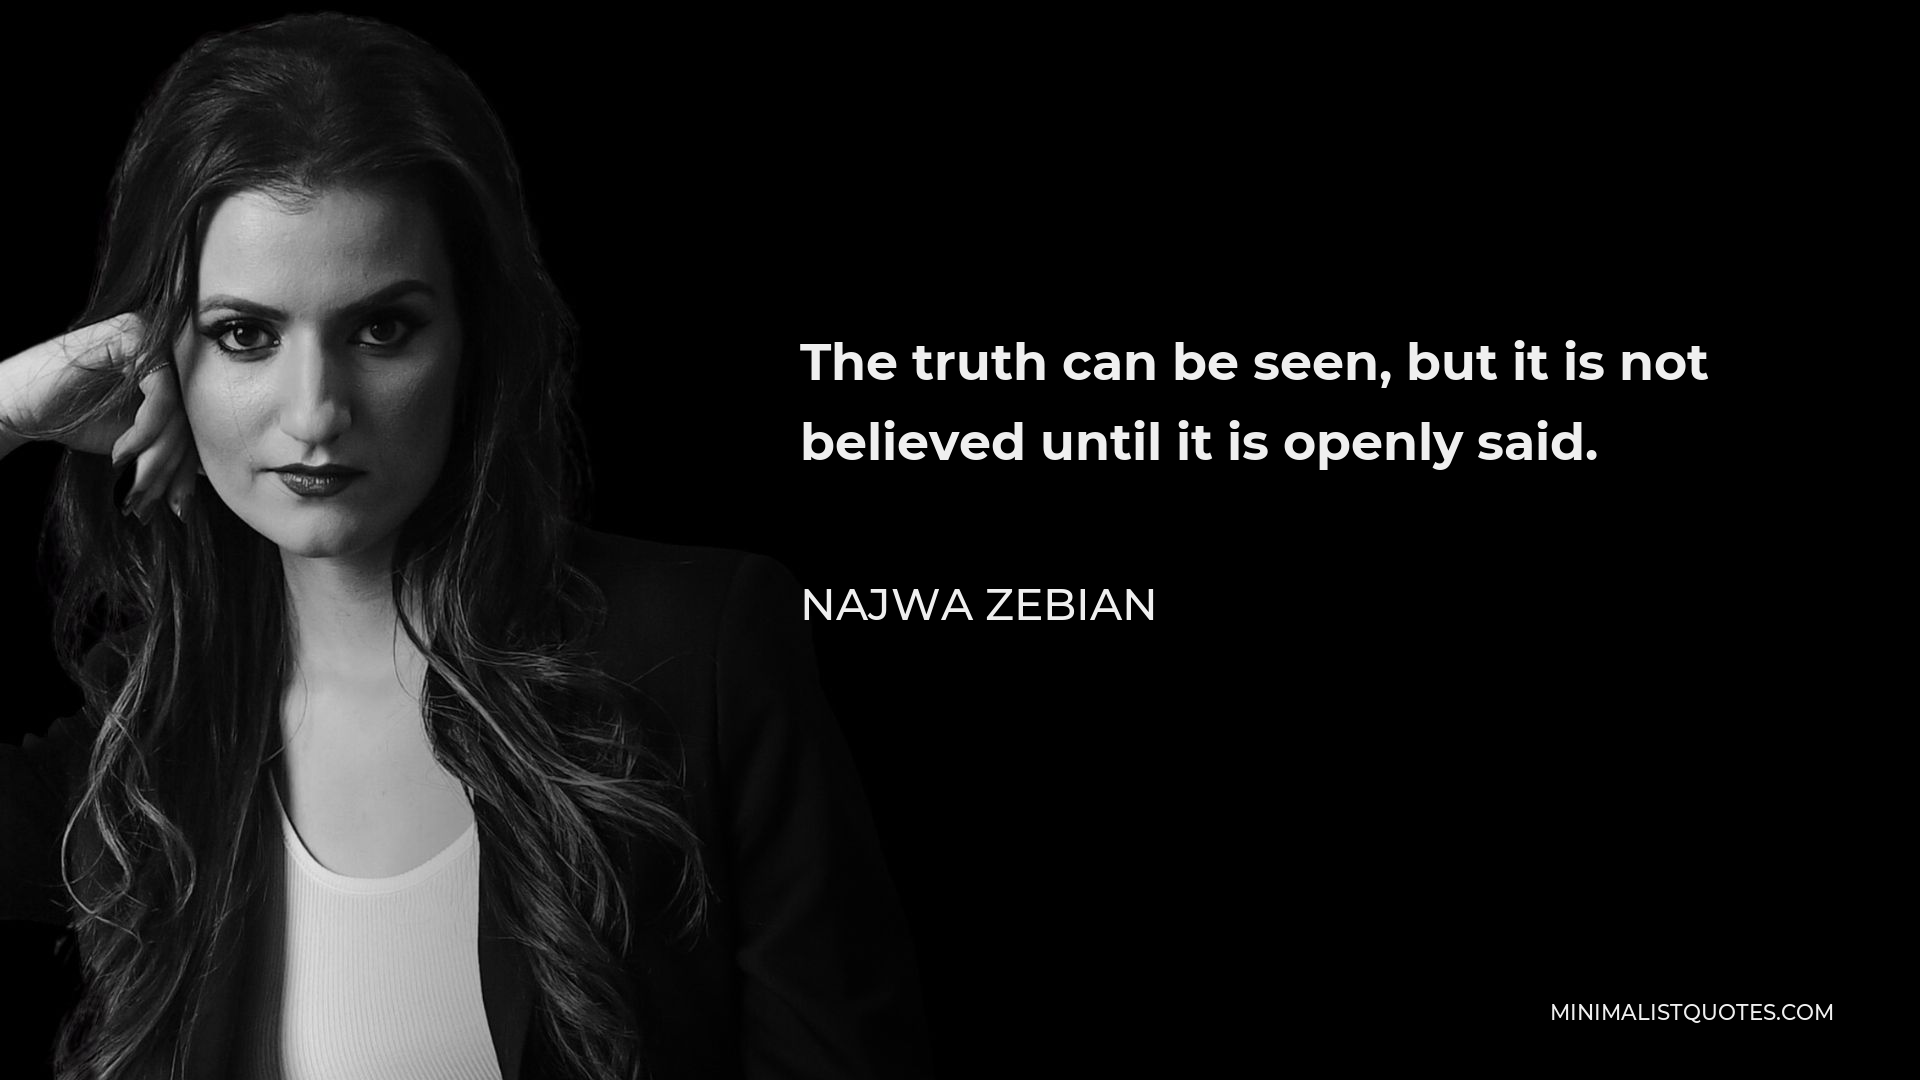 Najwa Zebian Quote - The truth can be seen, but it is not believed until it is openly said.